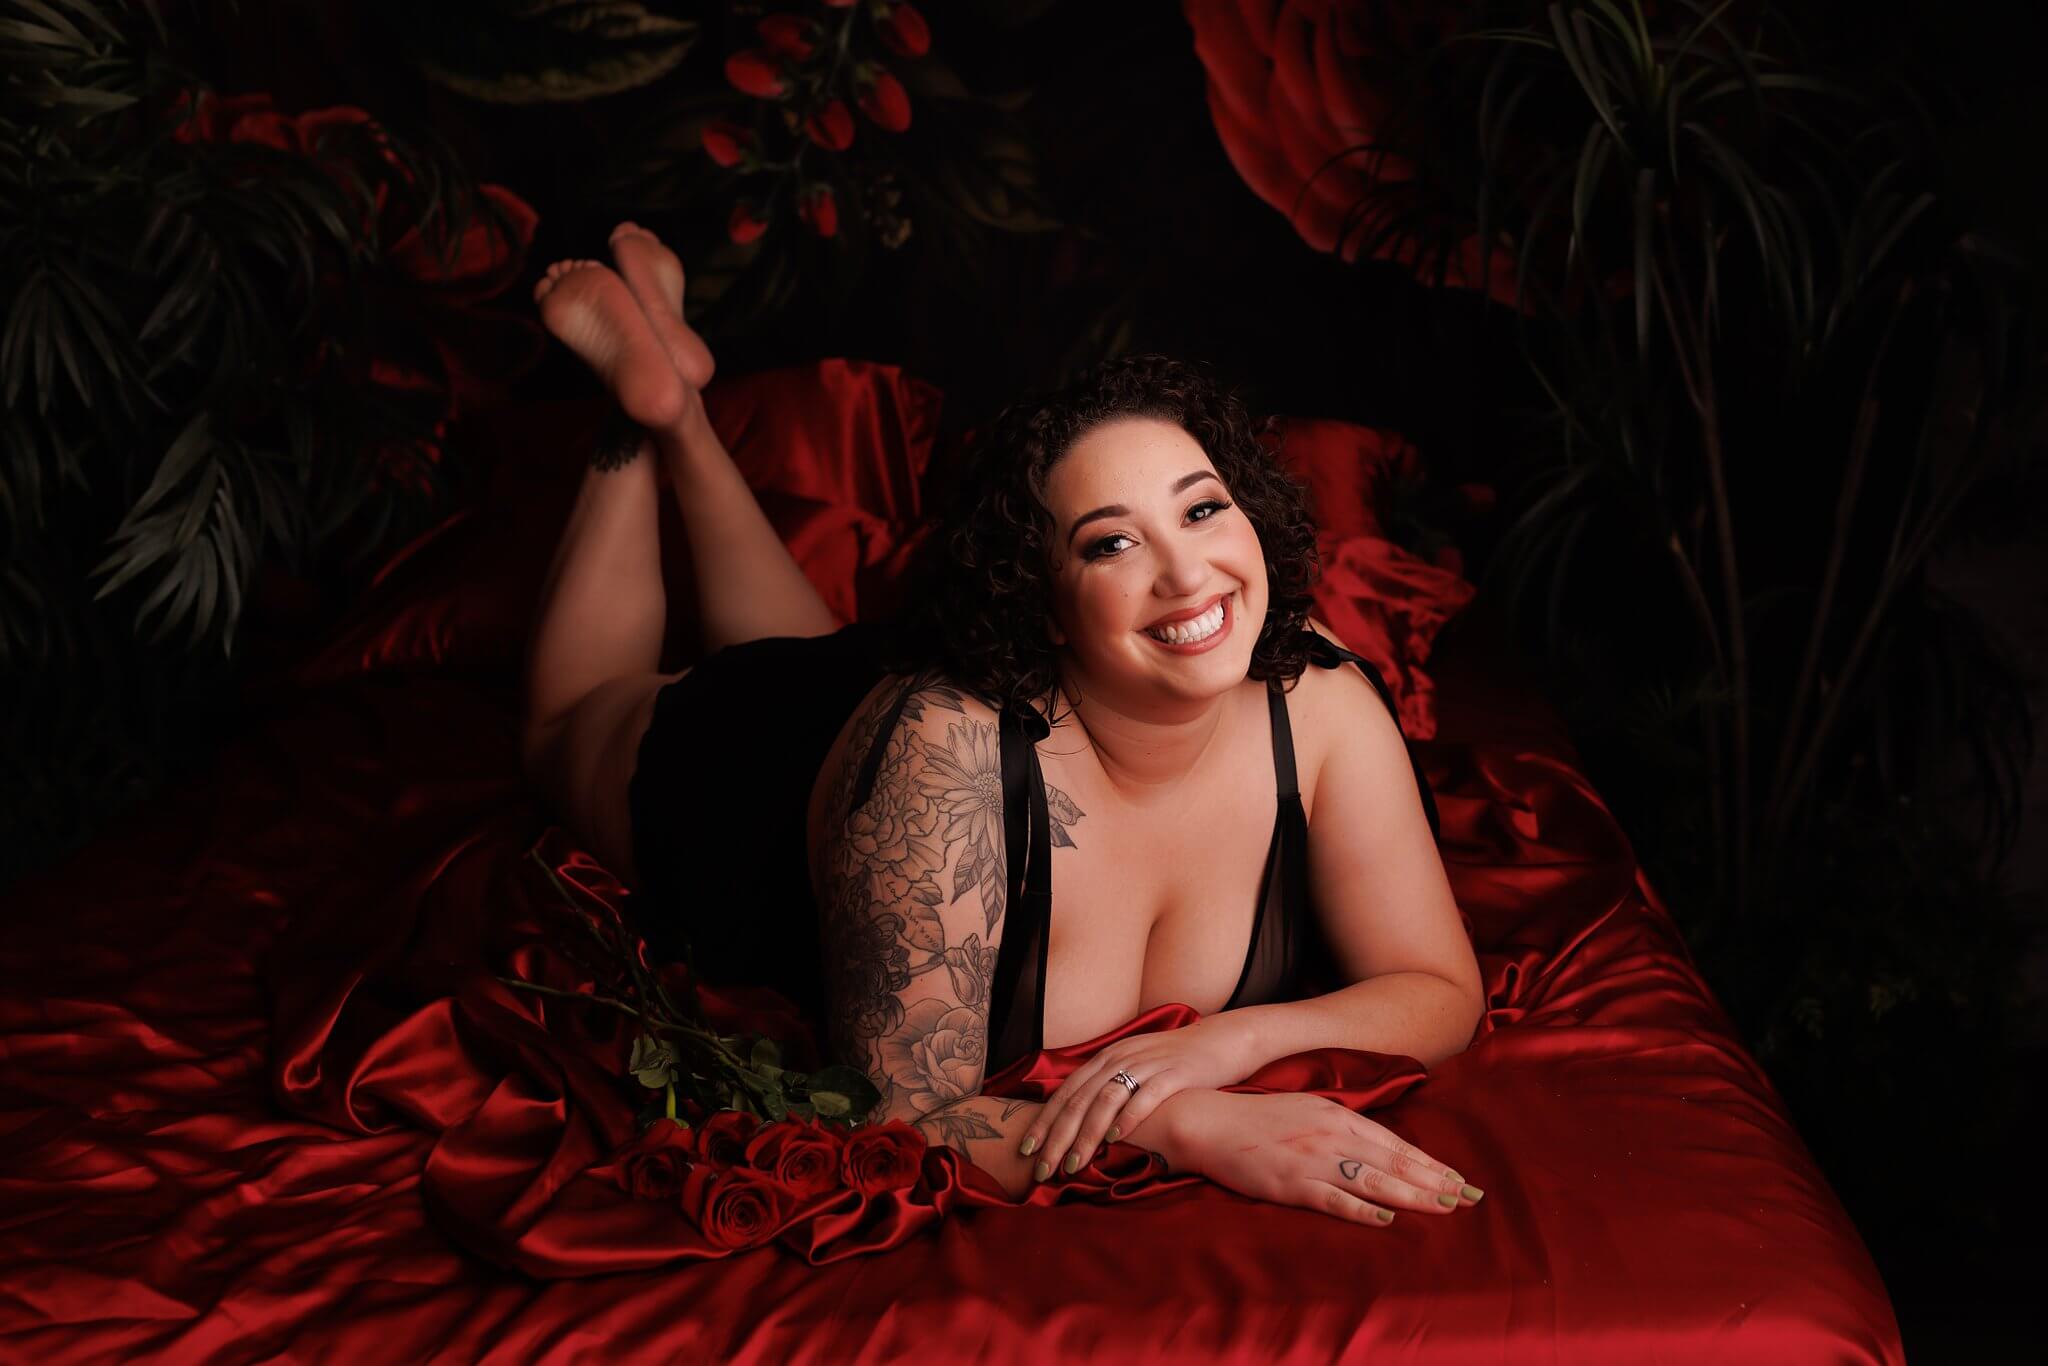 Beautiful woman with tattoos on her right arm, laying in lingerie on red satin sheets, smiling at the camera